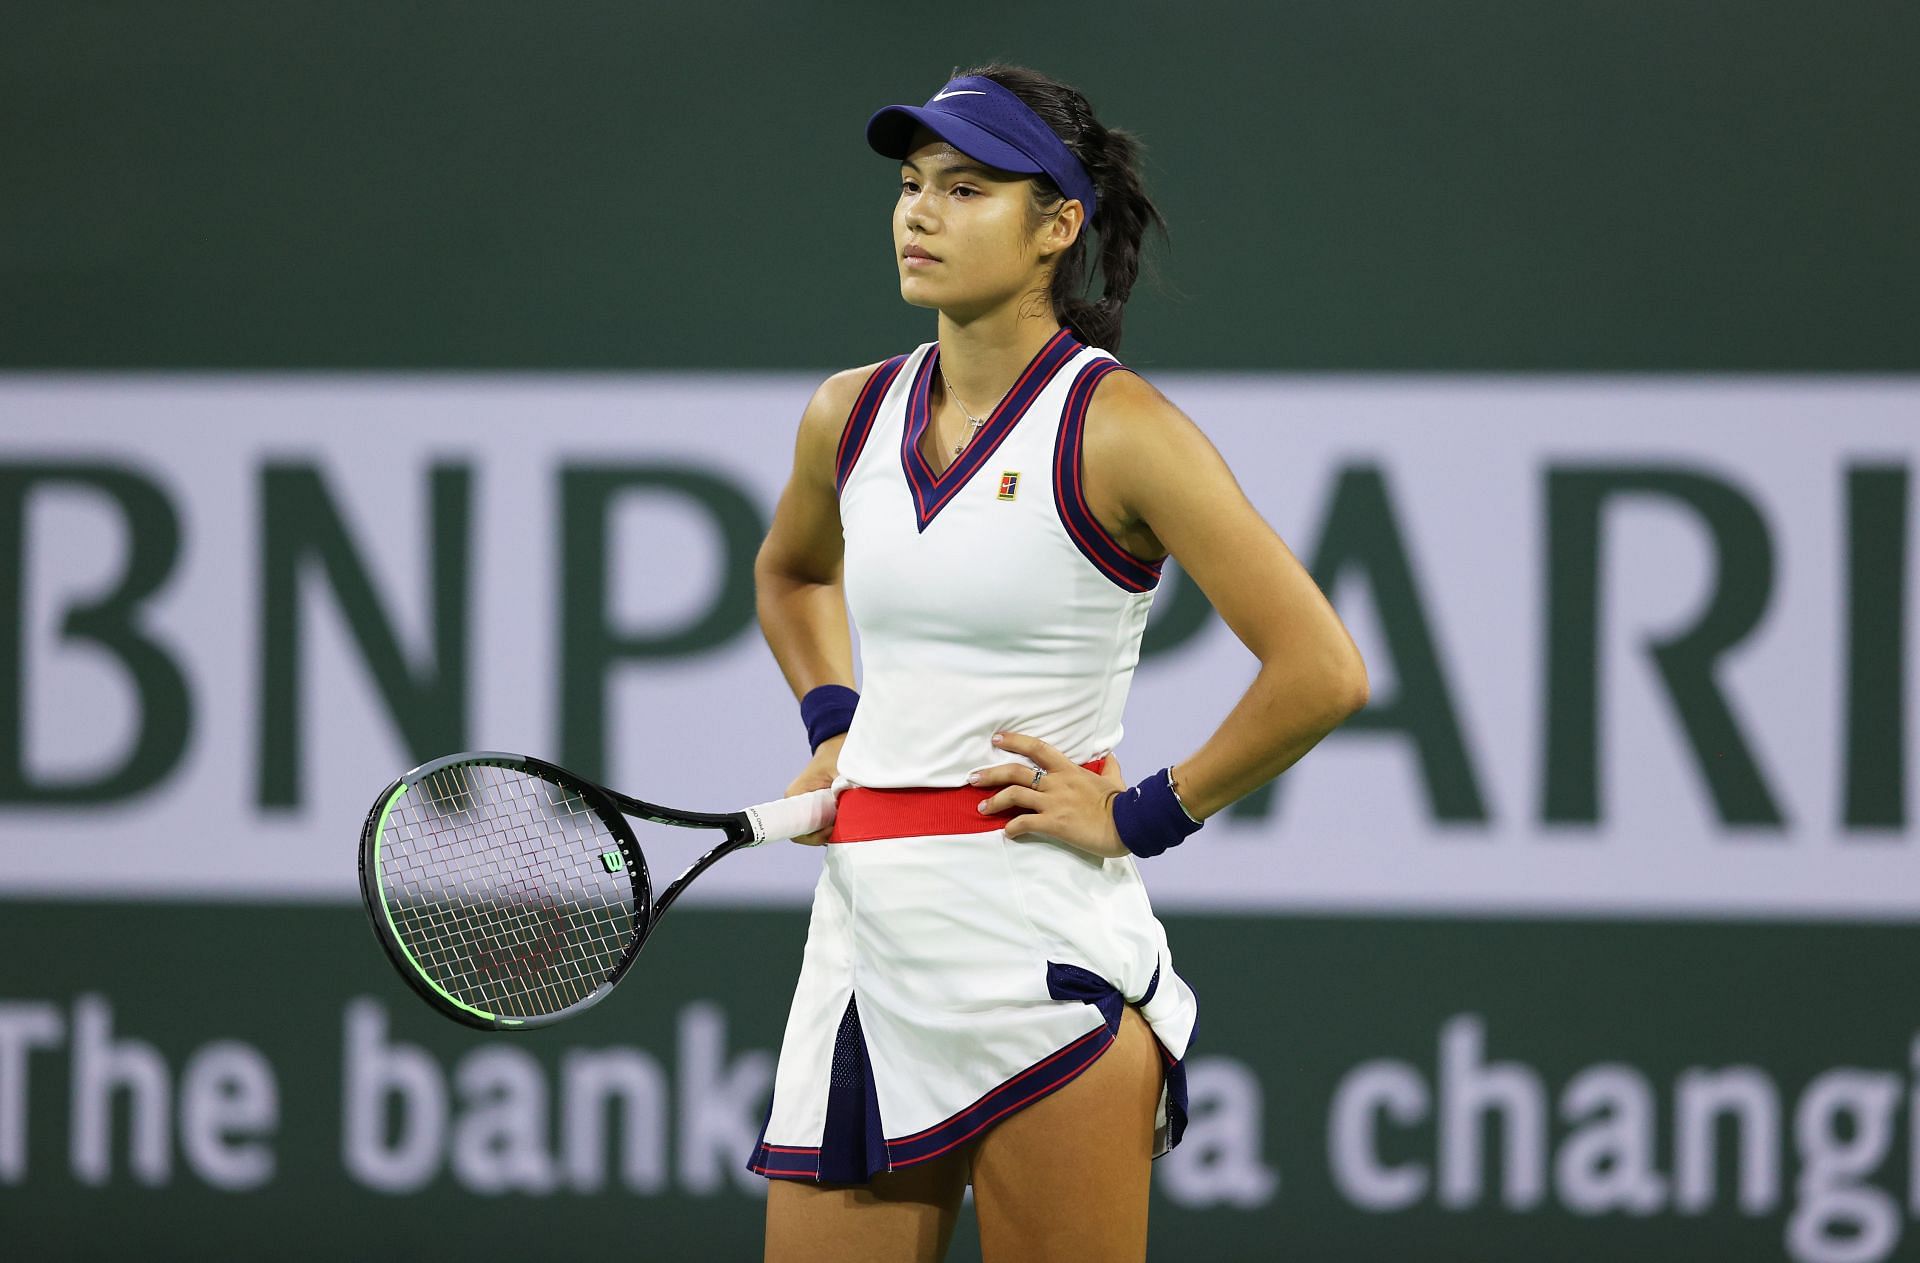 Emma Raducanu pictured at the BNP Paribas Open - Day 5.